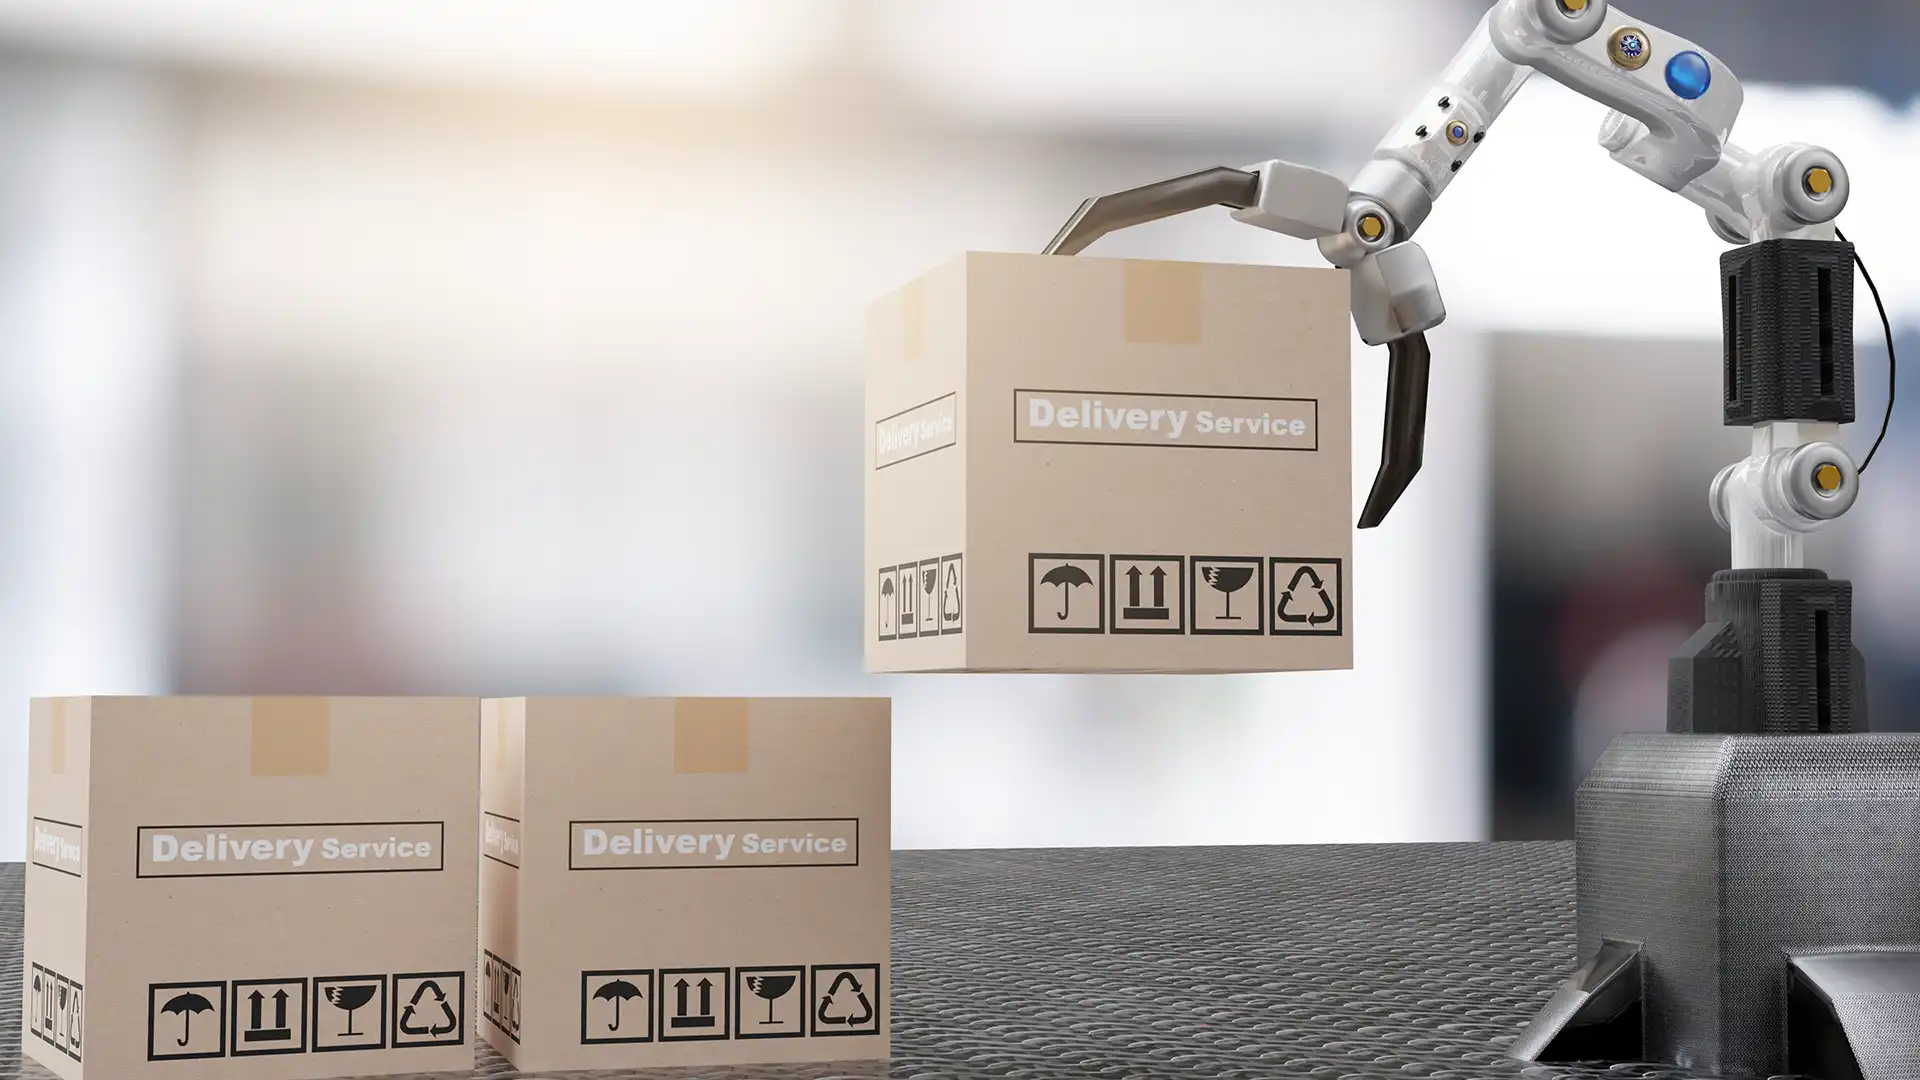 Three Picking and Packing Best Practices for Improving Order Fulfillment